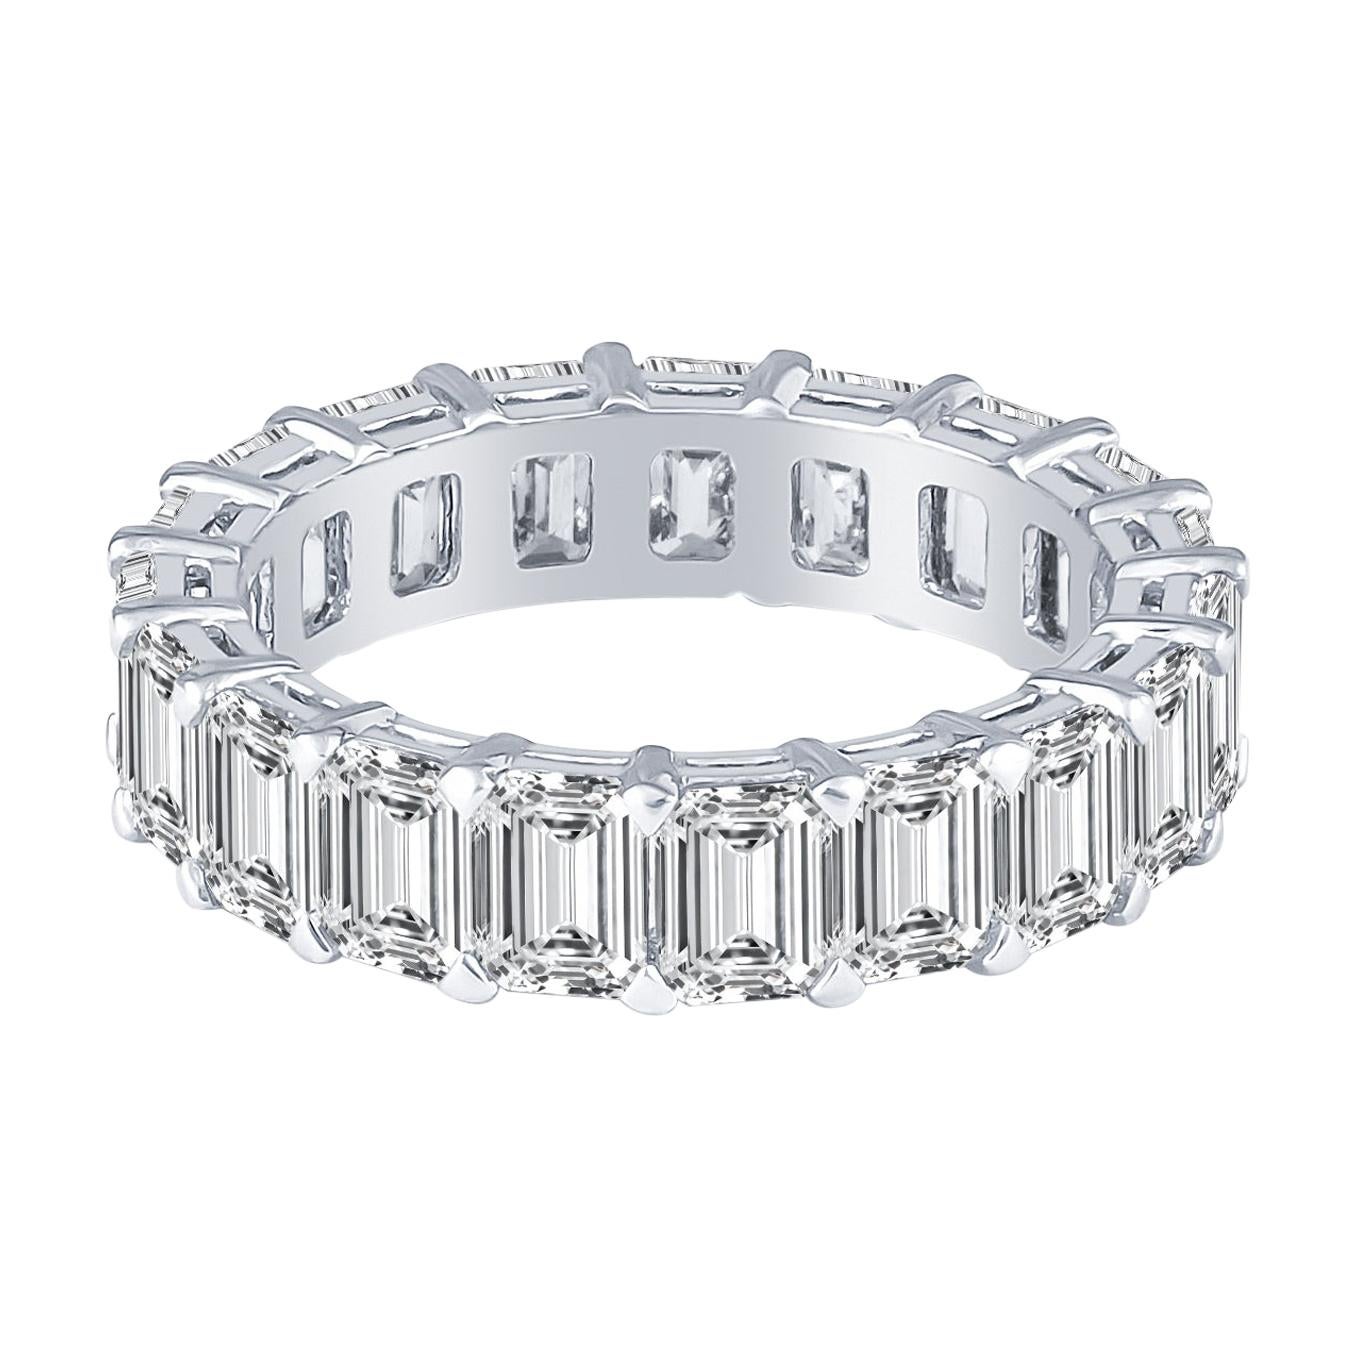 5.79 Carat Emerald Cut Diamond Eternity Band Handcrafted in Platinum Low-Profile For Sale